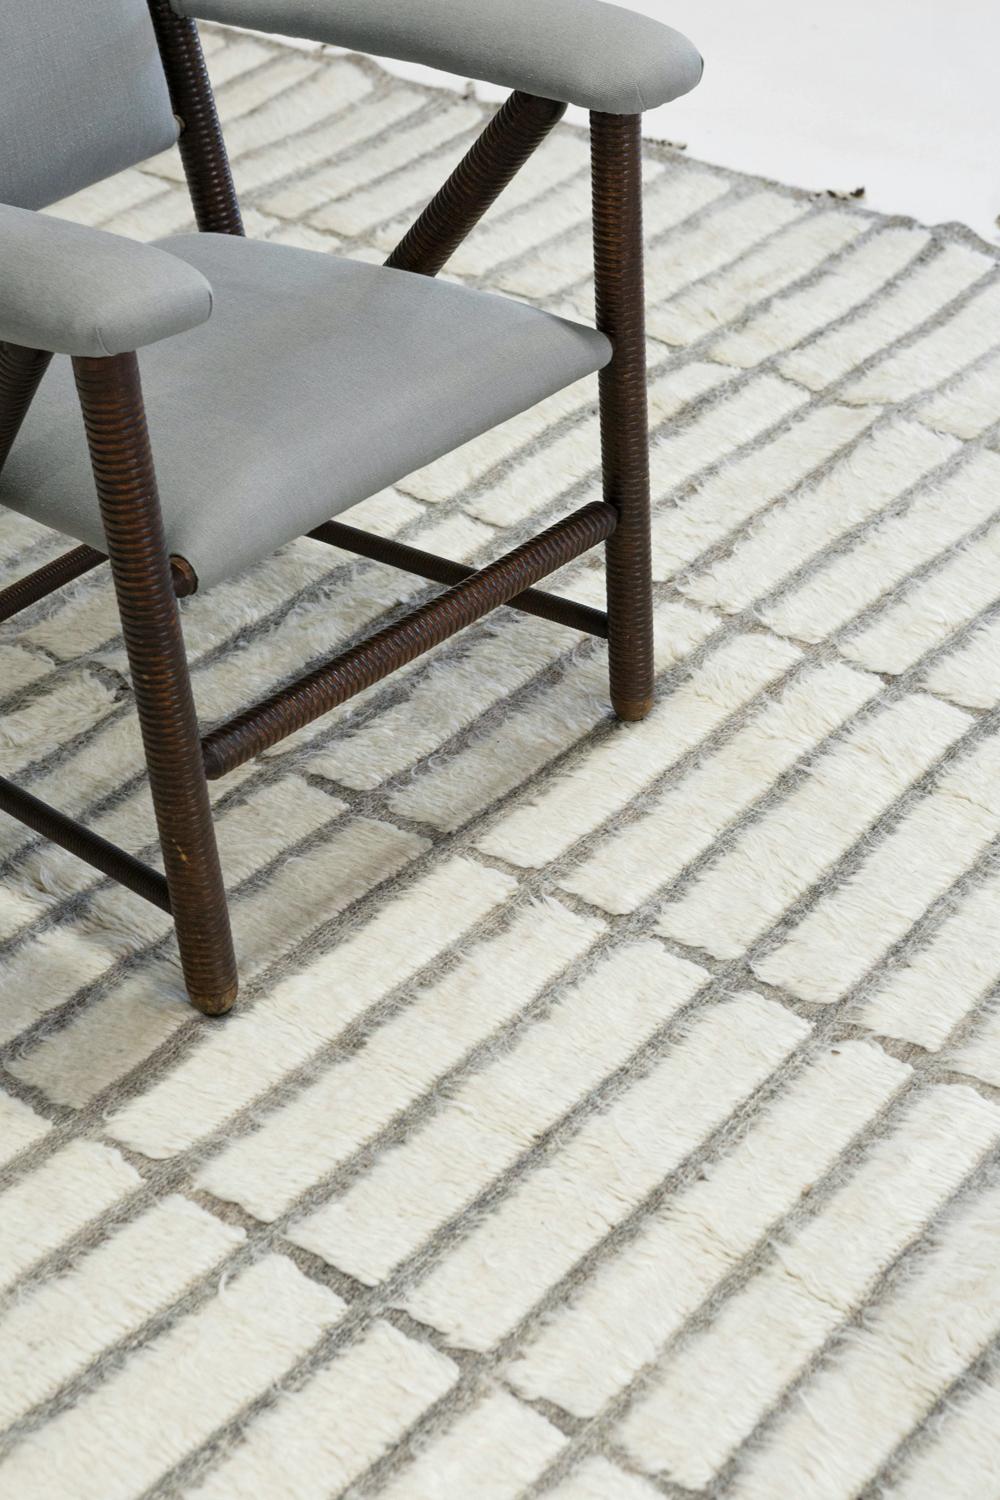 'Pommie' is made of handwoven luxurious wool rug with timeless embossed rectangular detailing. In addition to its gray flat weave, Pommie has a beautiful ivory shag that brings a lustrous and contemporary feel to one's space. The Haute Bohemian